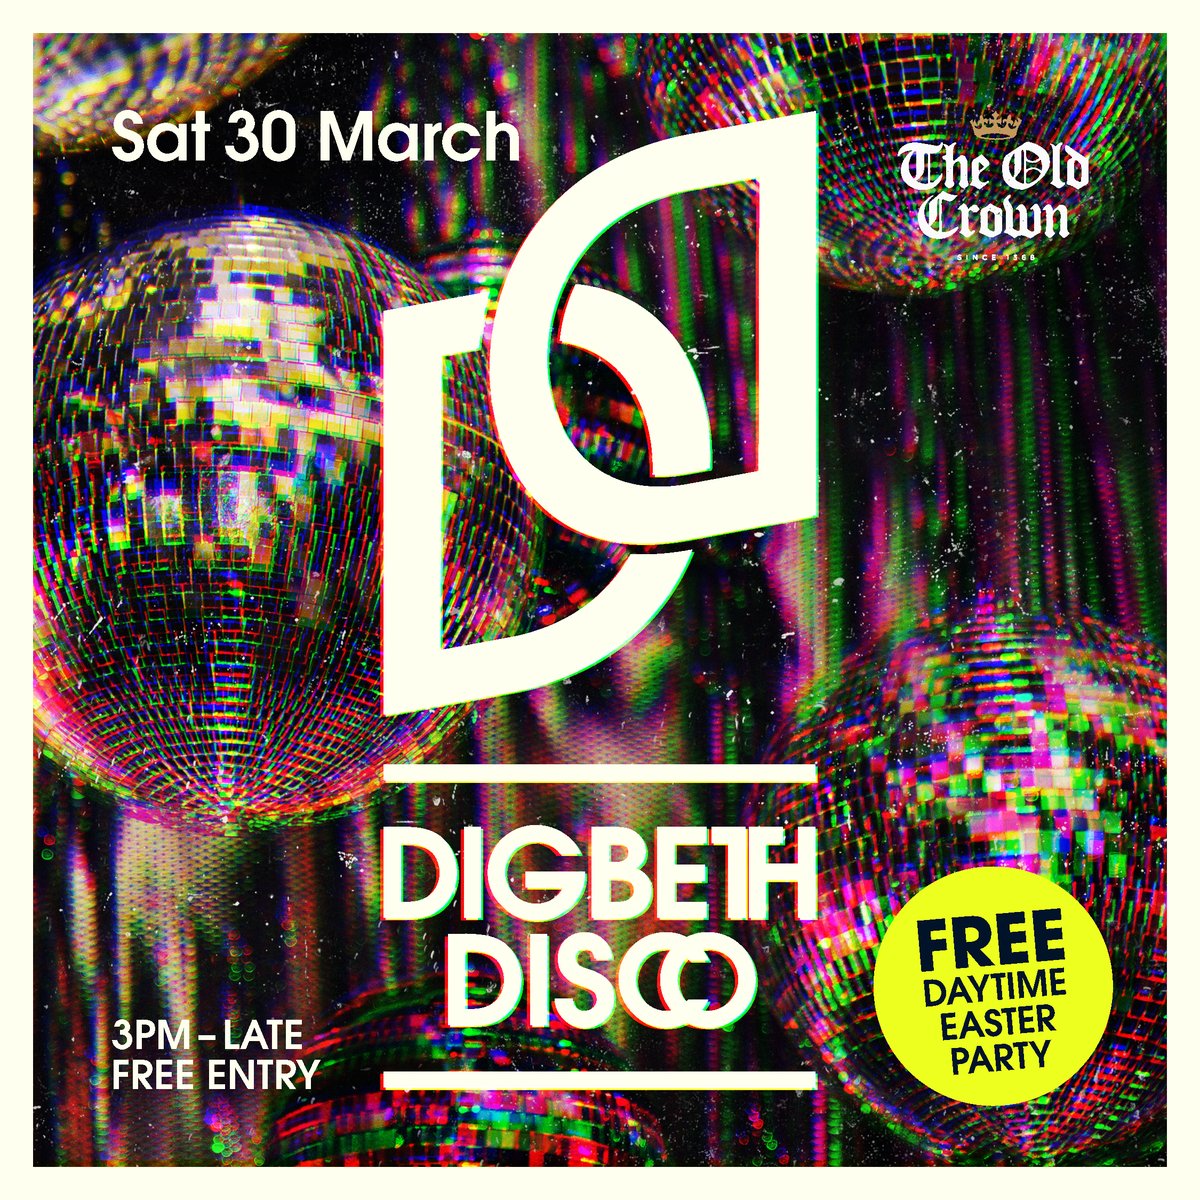 Just over a week to go until our DIGBETH EASTER DISCO💃 There ain't no party like an Old Crown party, so get your flares out and join us on the dance floor on Saturday 30th March🪩 And the best part? It's FREE ENTRY! Reserve your spot today over at bit.ly/digbetheasterd…